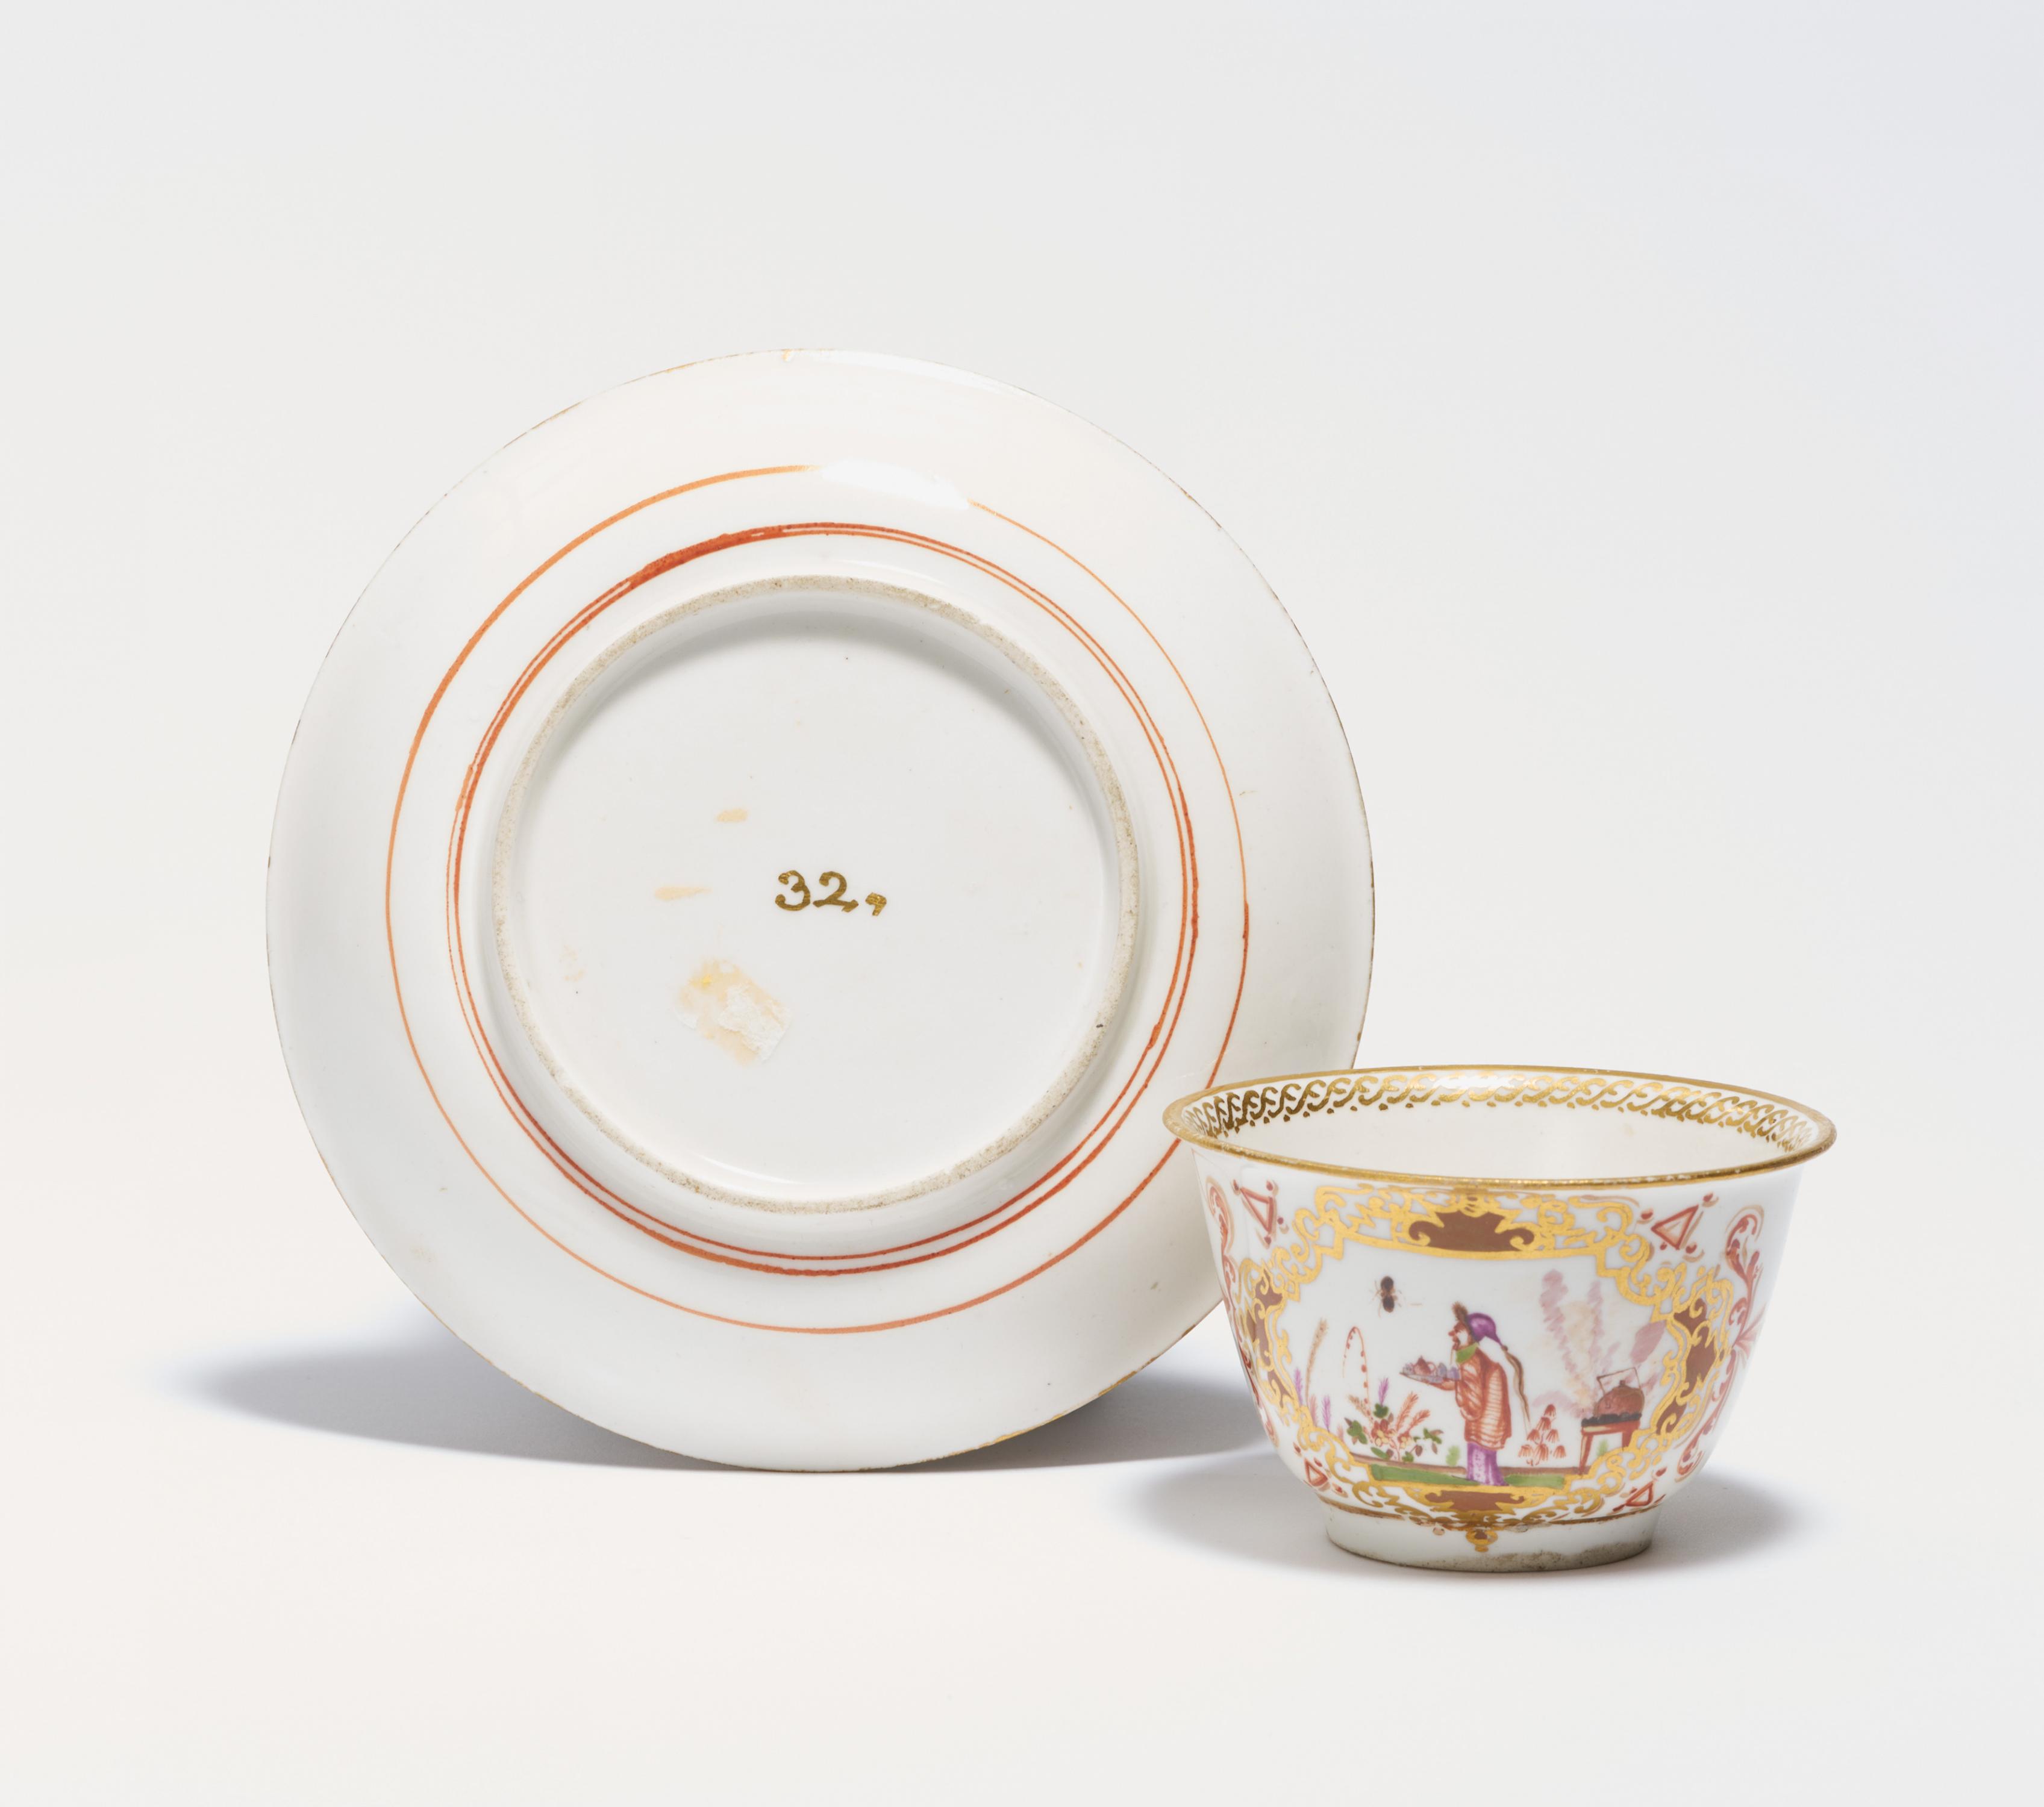 Tea bowl and saucer with chinoiseries - Image 3 of 7